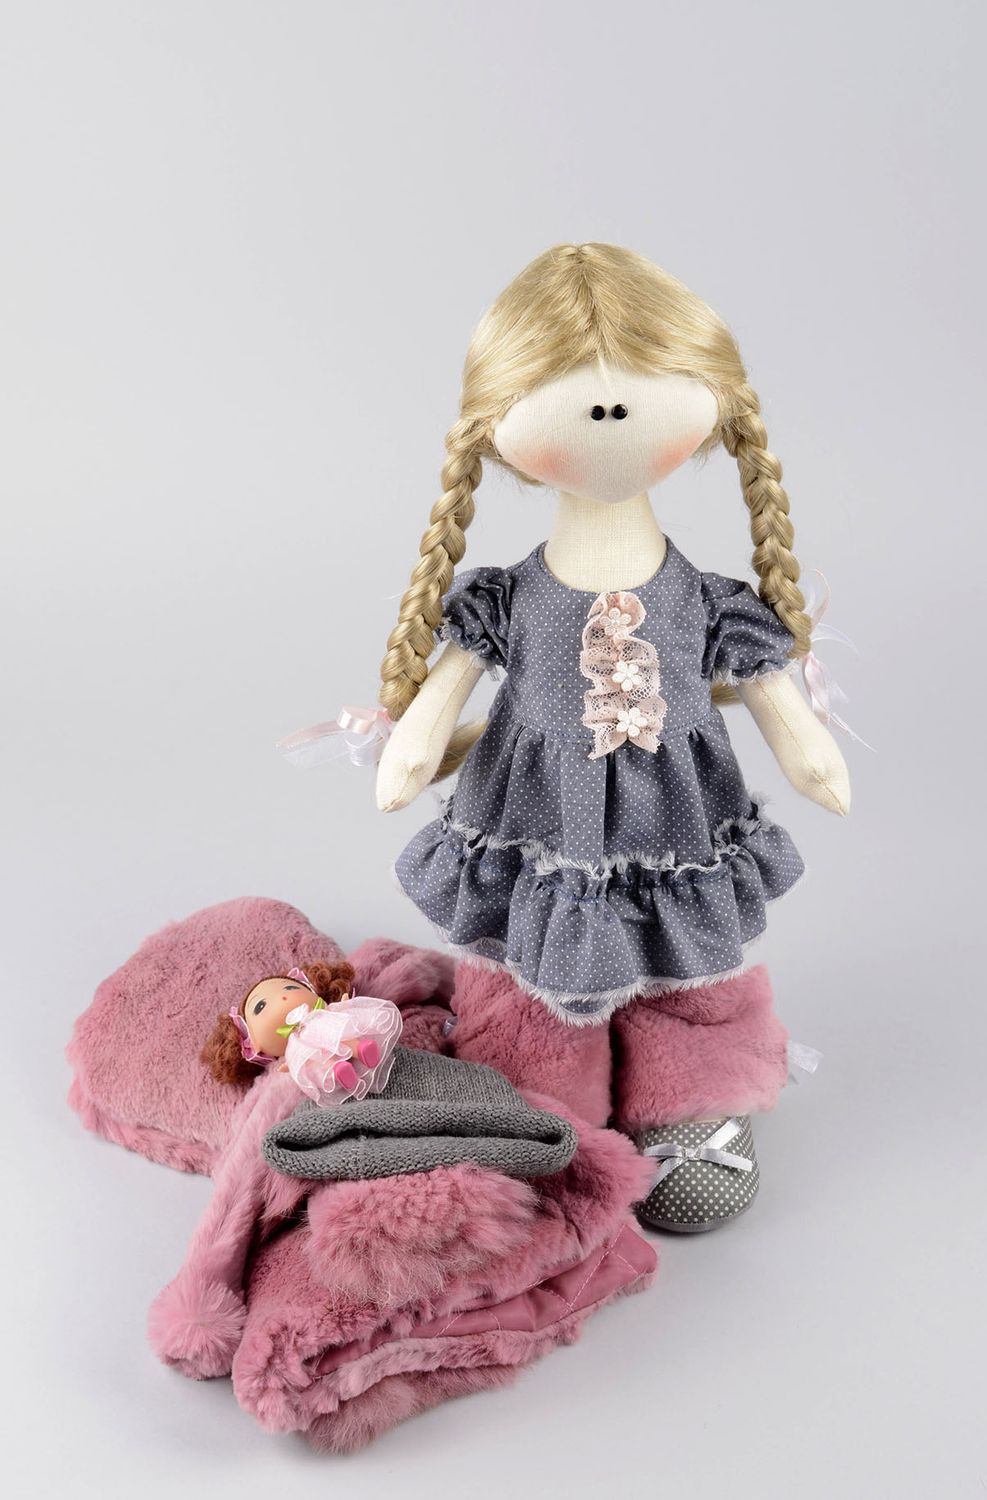 Handmade soft doll collectible doll toys for kids presents for girls home decor photo 3